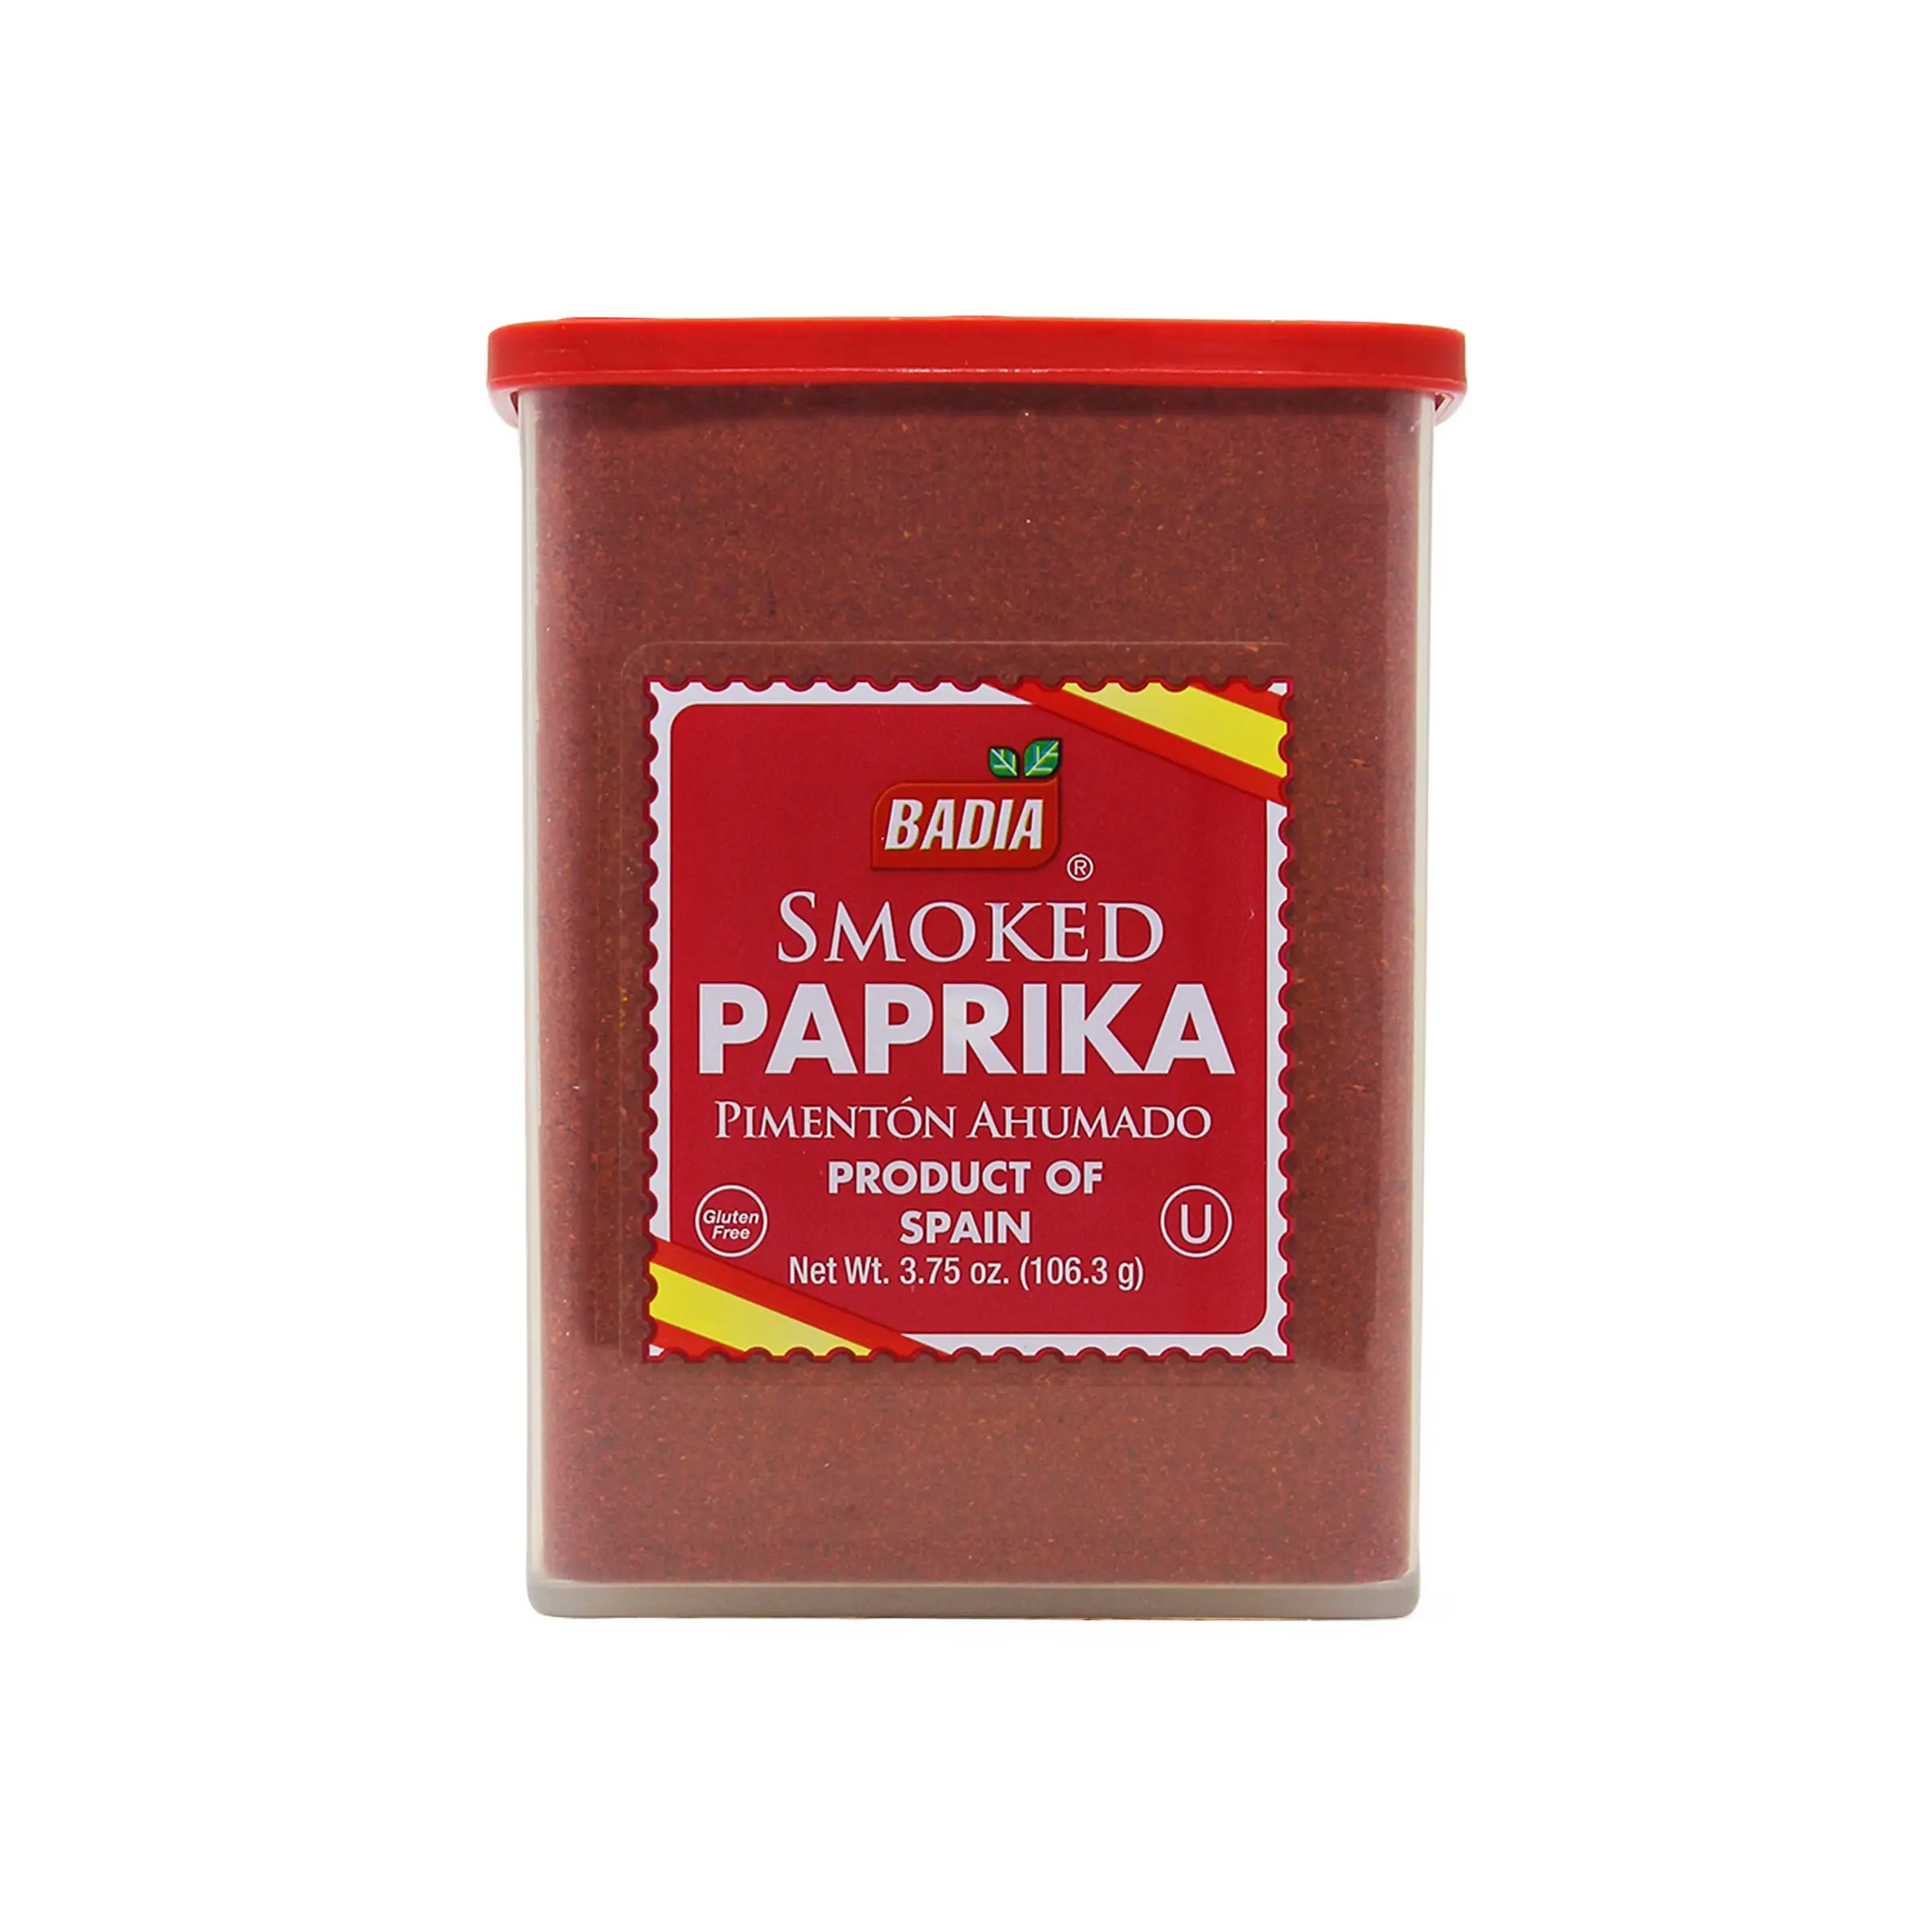 is smoked paprika gluten free - What brands of paprika are gluten free